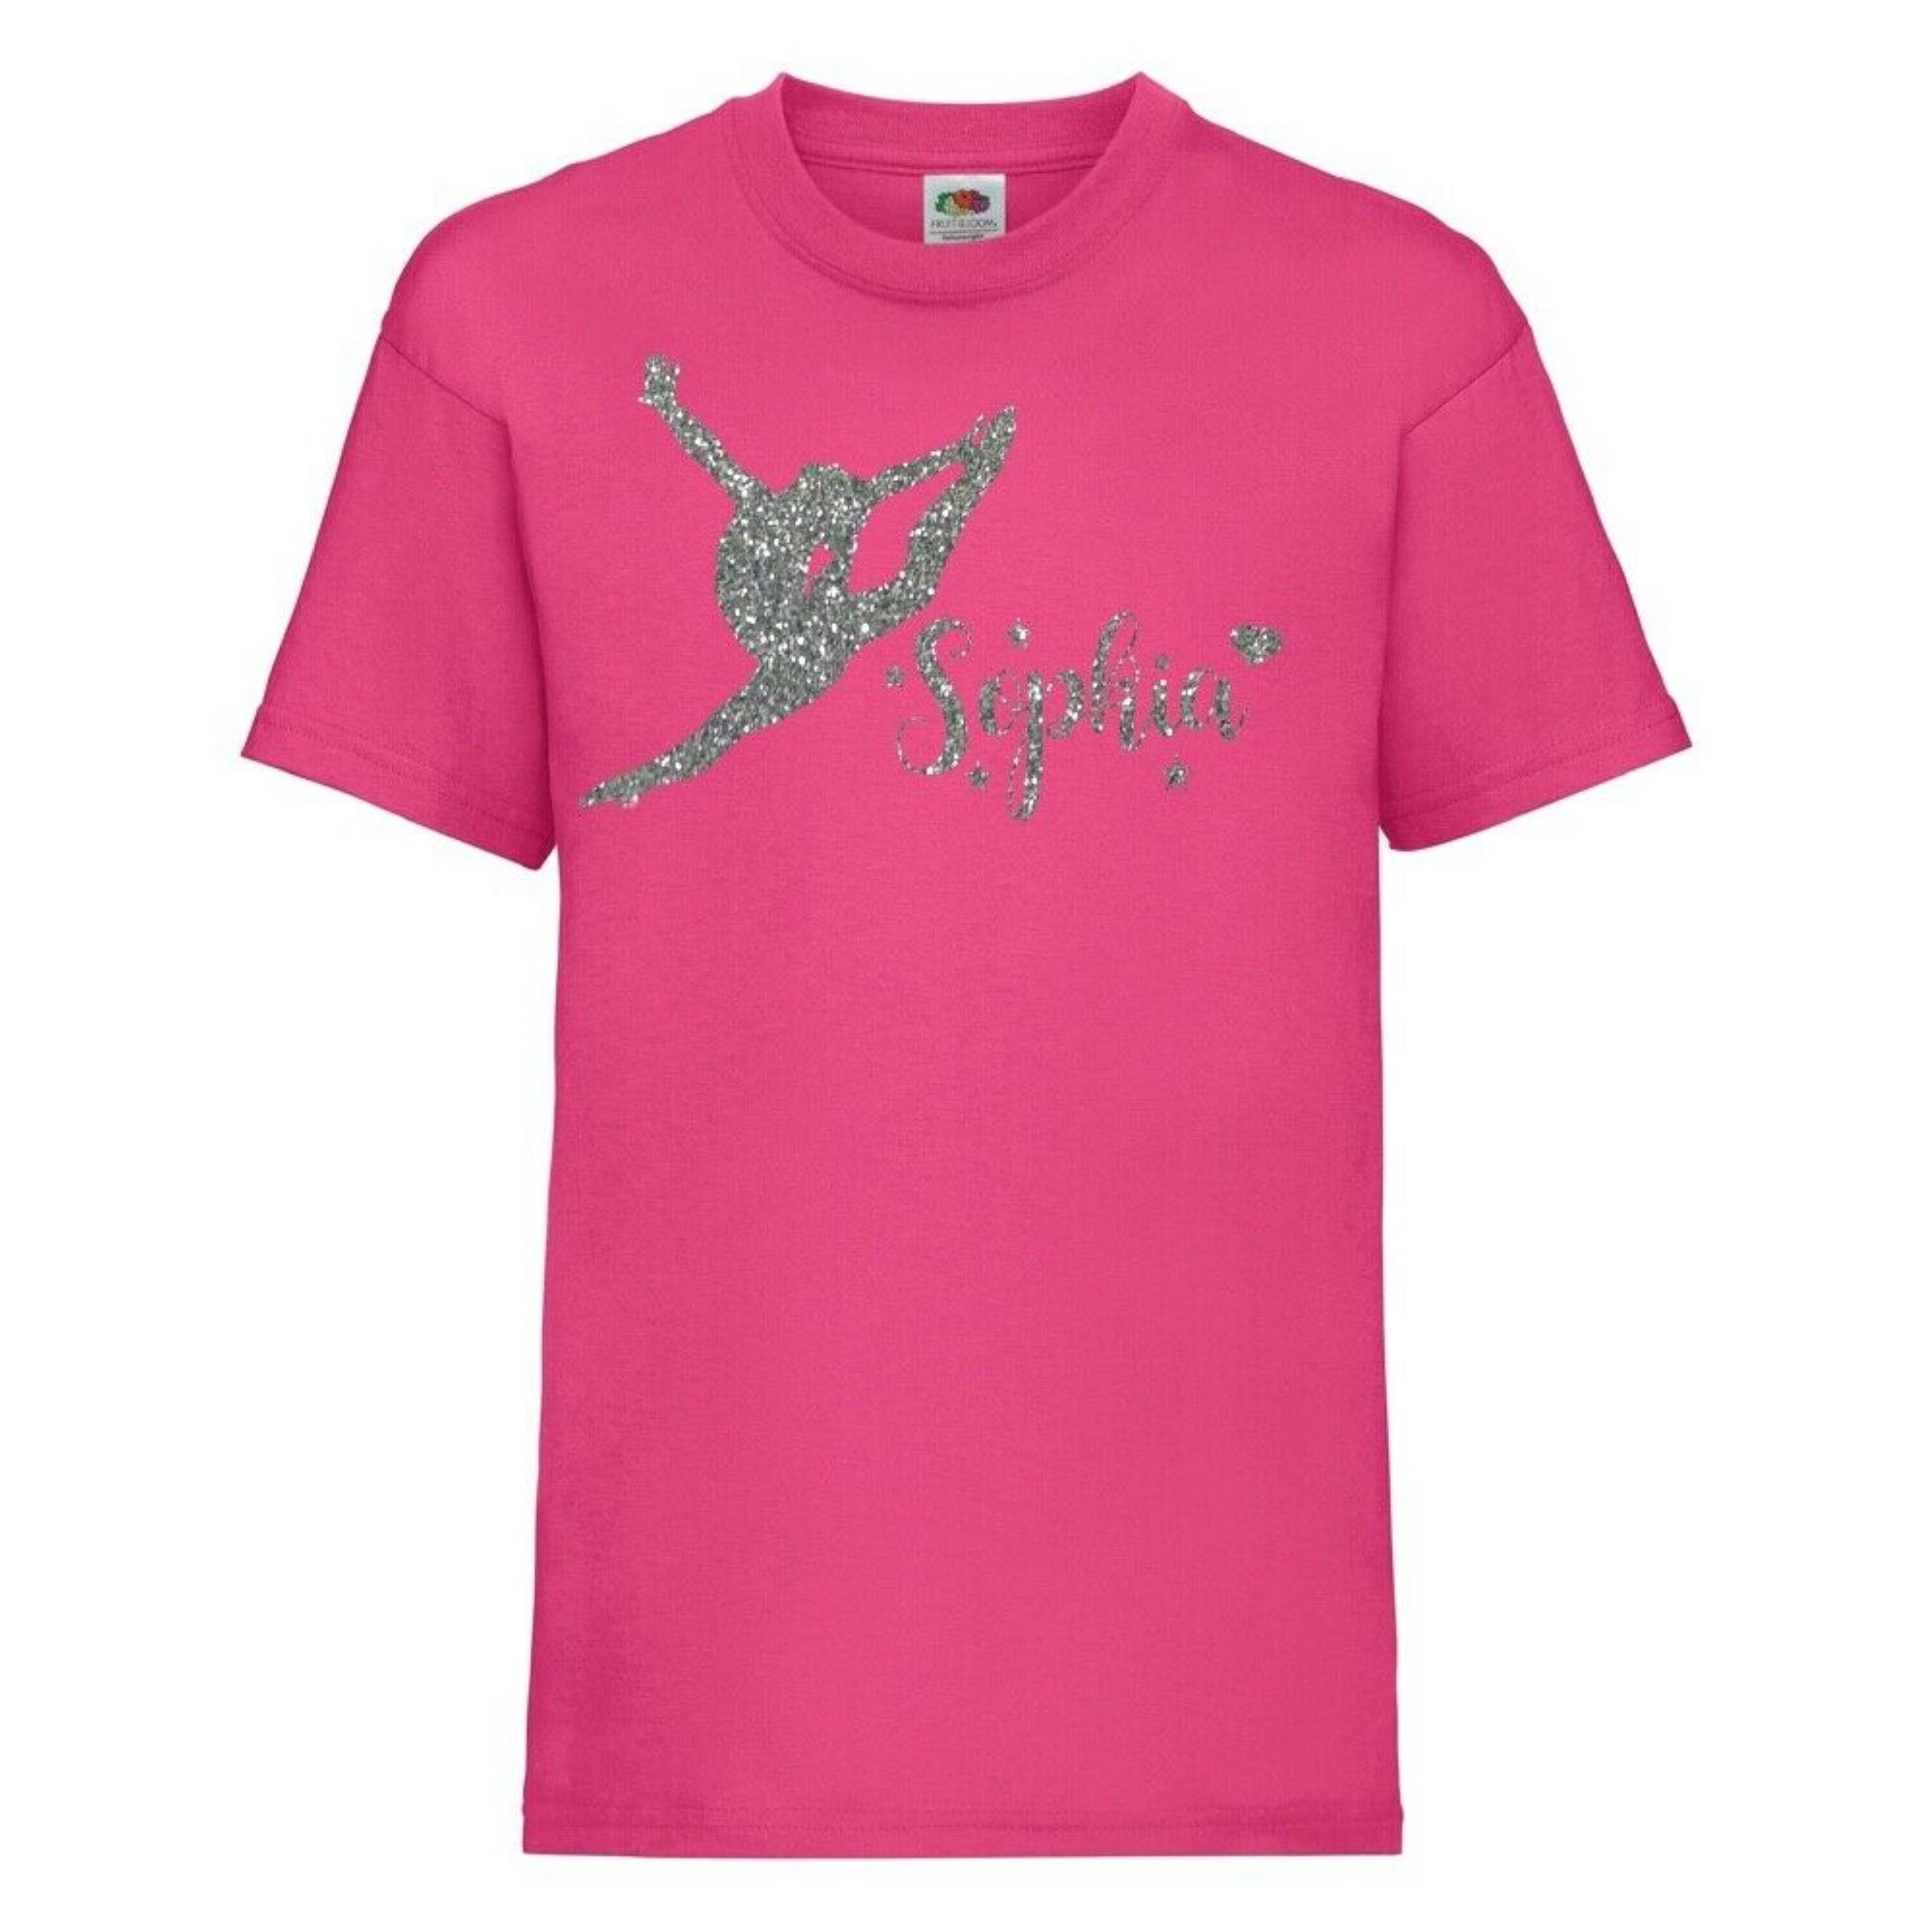 KIDS Gymnastic Choice of Design T-shirt Personalised Lots of - Etsy